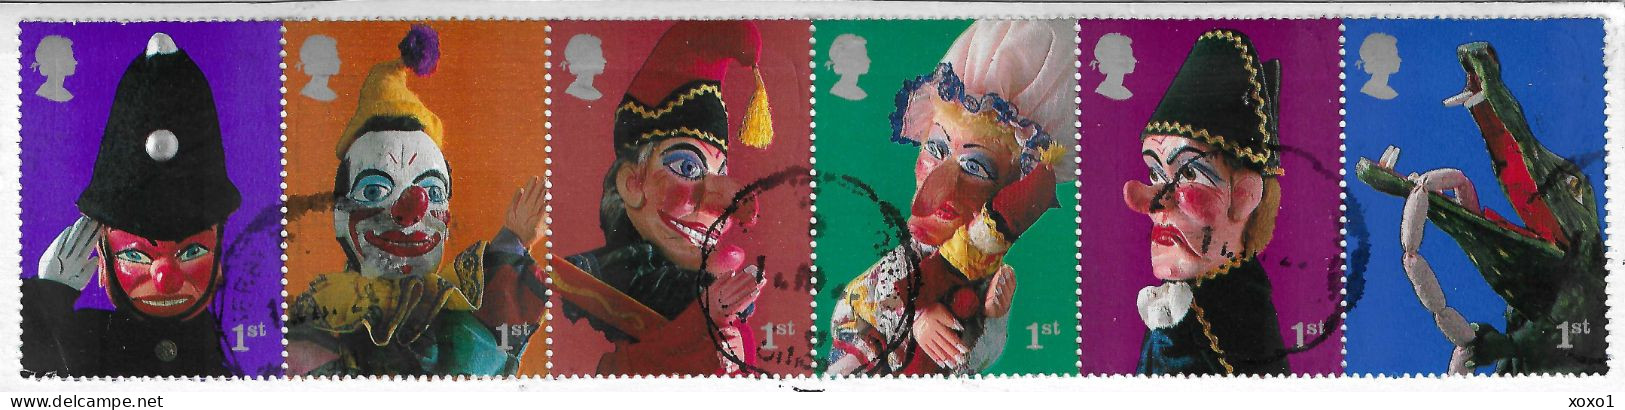 Great Britain 2001 MiNr. 1946 - 1951 Großbritannien Hand Puppet Theater: Punch And Judy Childhood Dolls 6v Used 7.50 € - Poupées